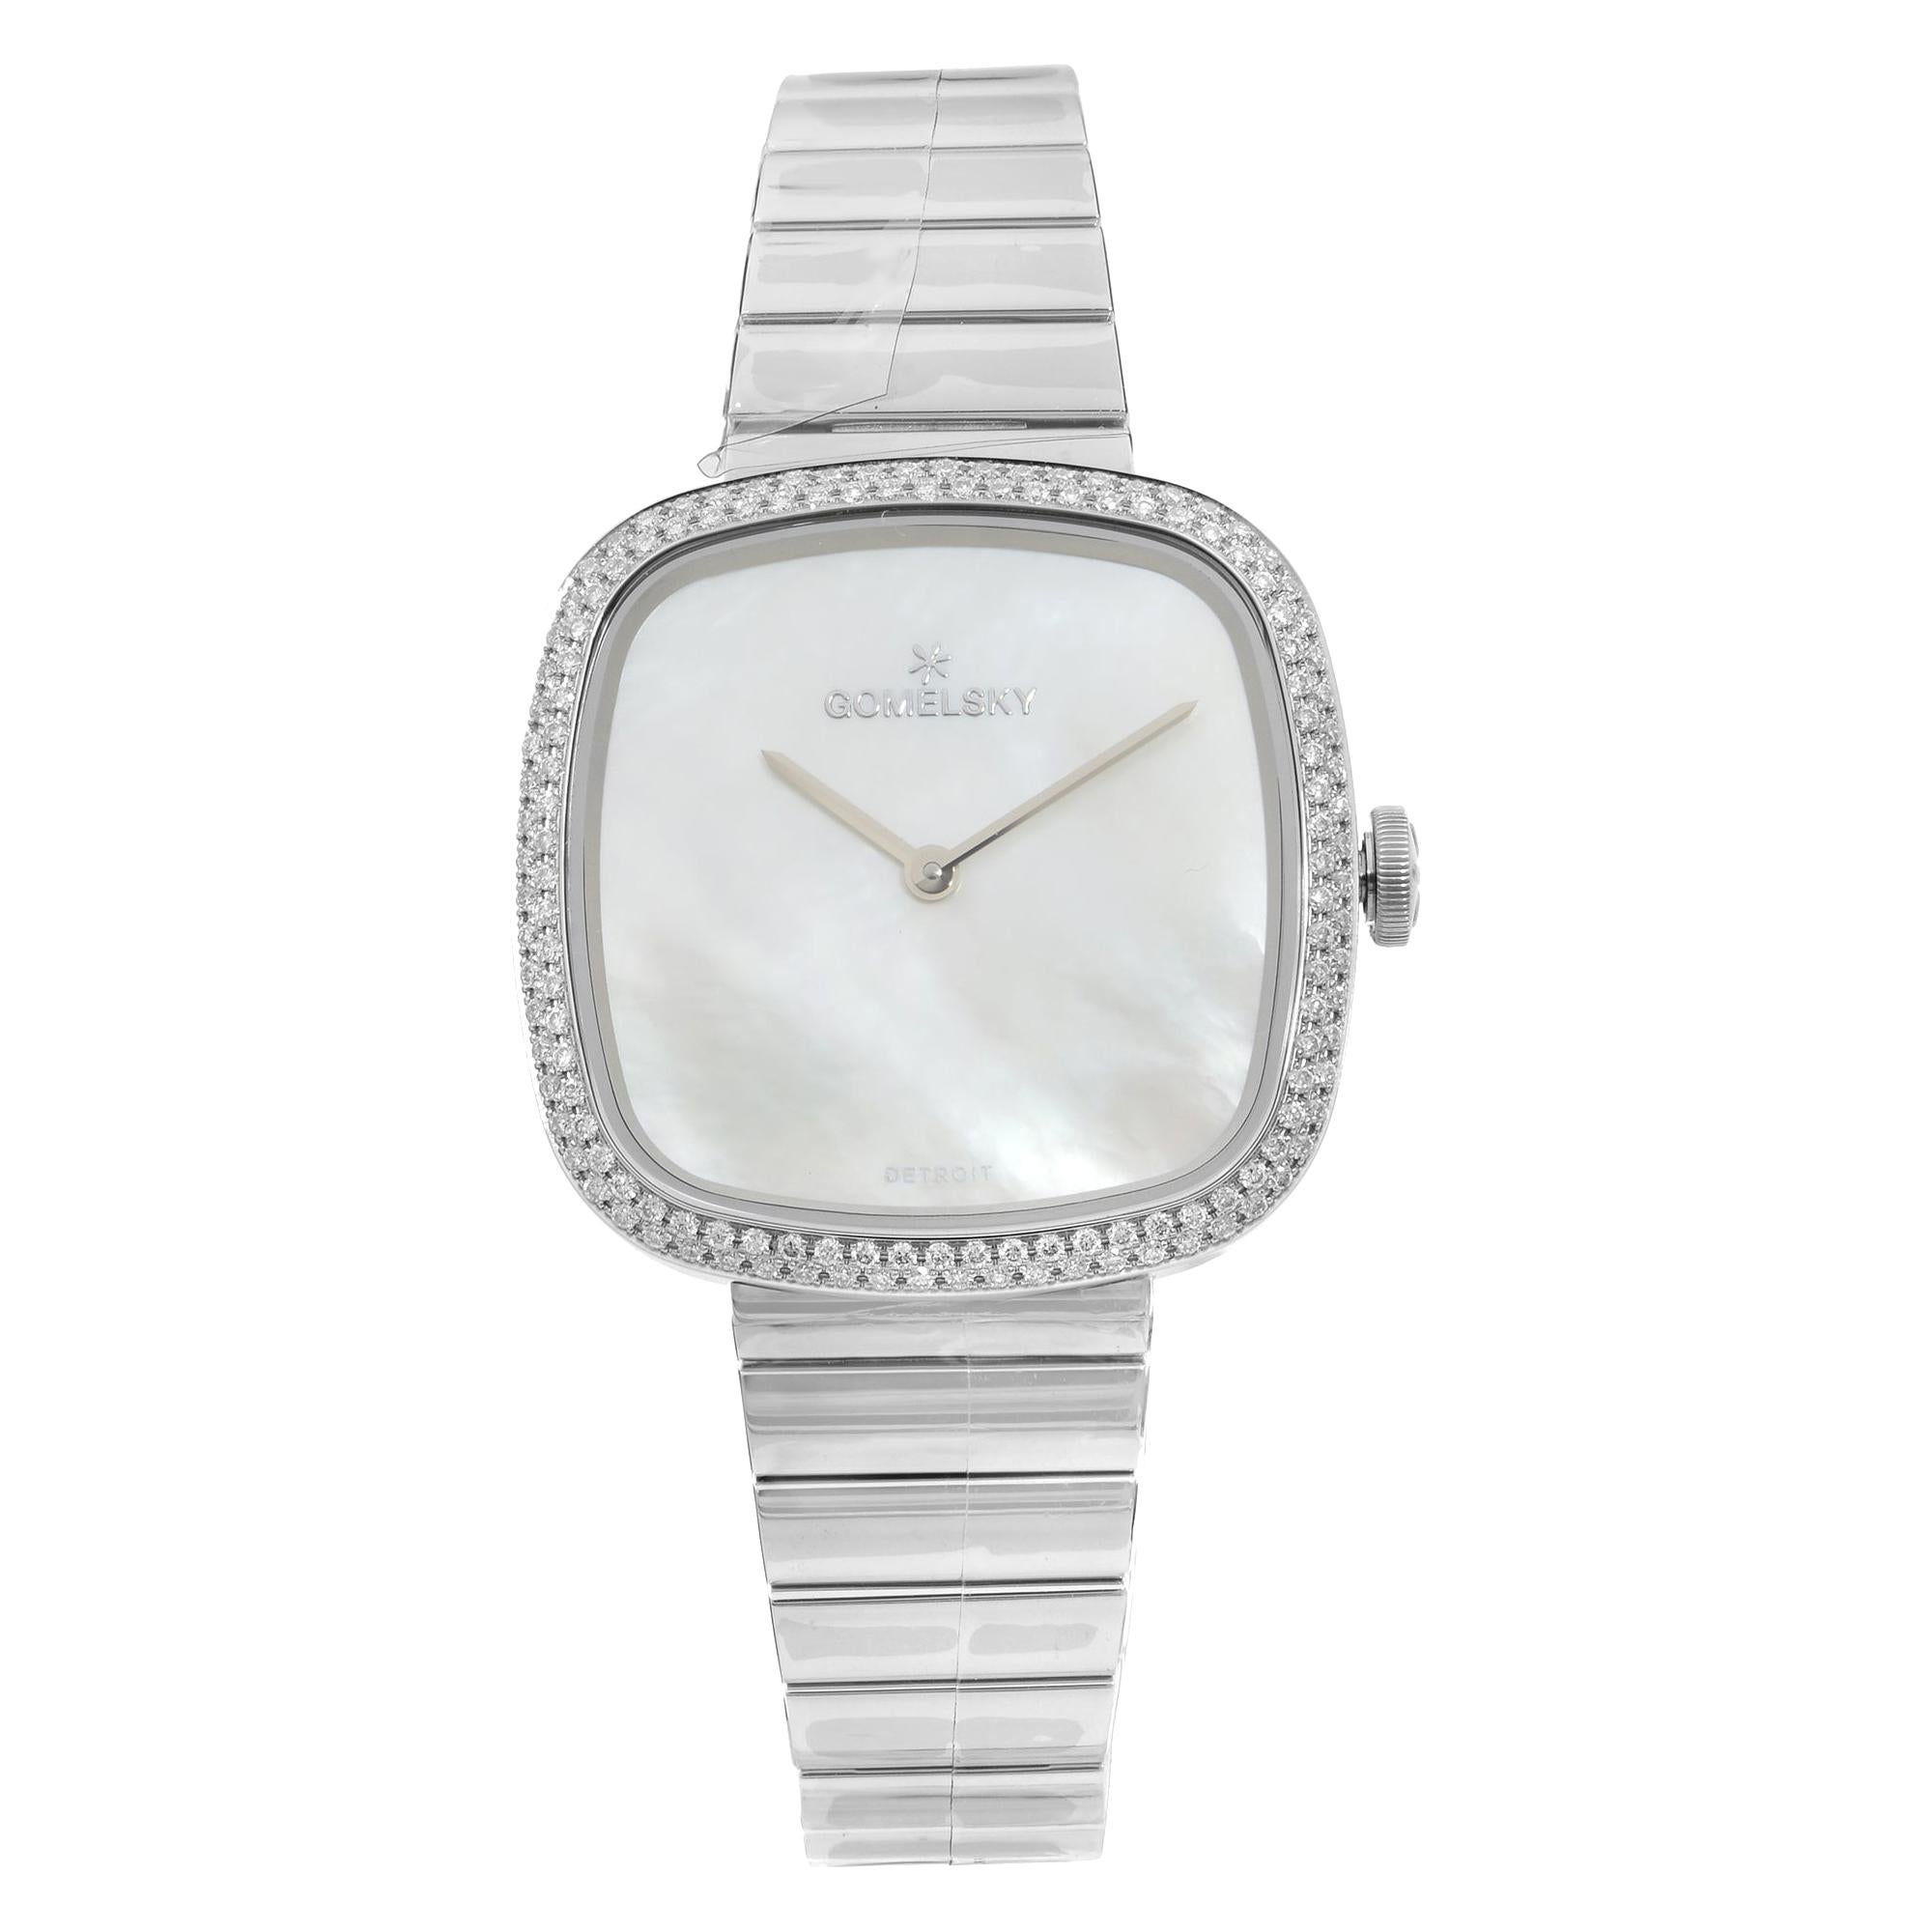 Gomelsky Eppie Sneed Stainless Steel Diamond White Dial Ladies Watch G0120095028